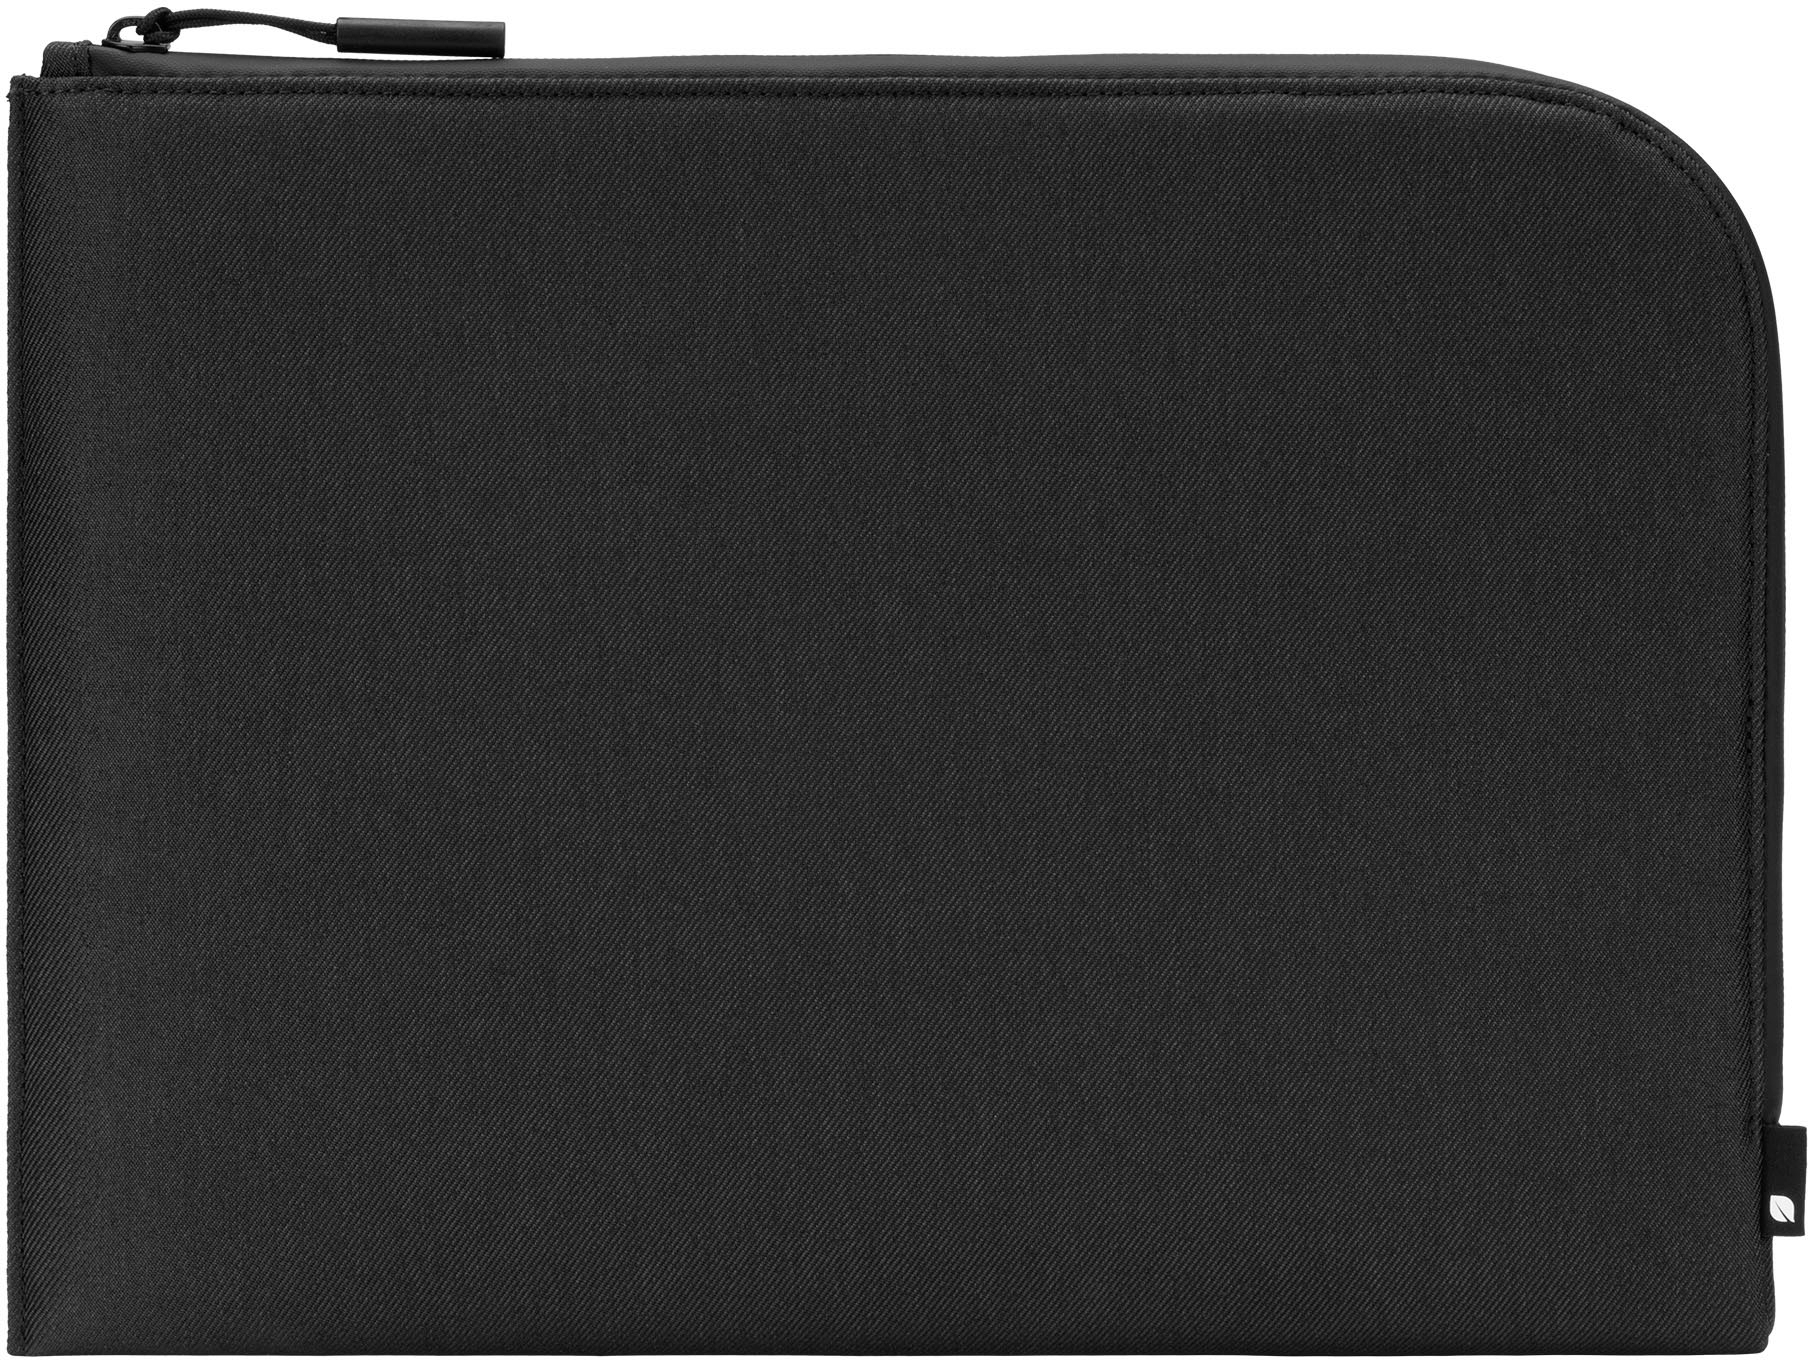 Back View: Incase - Facet Sleeve up to 14" Macbook Pro - Black